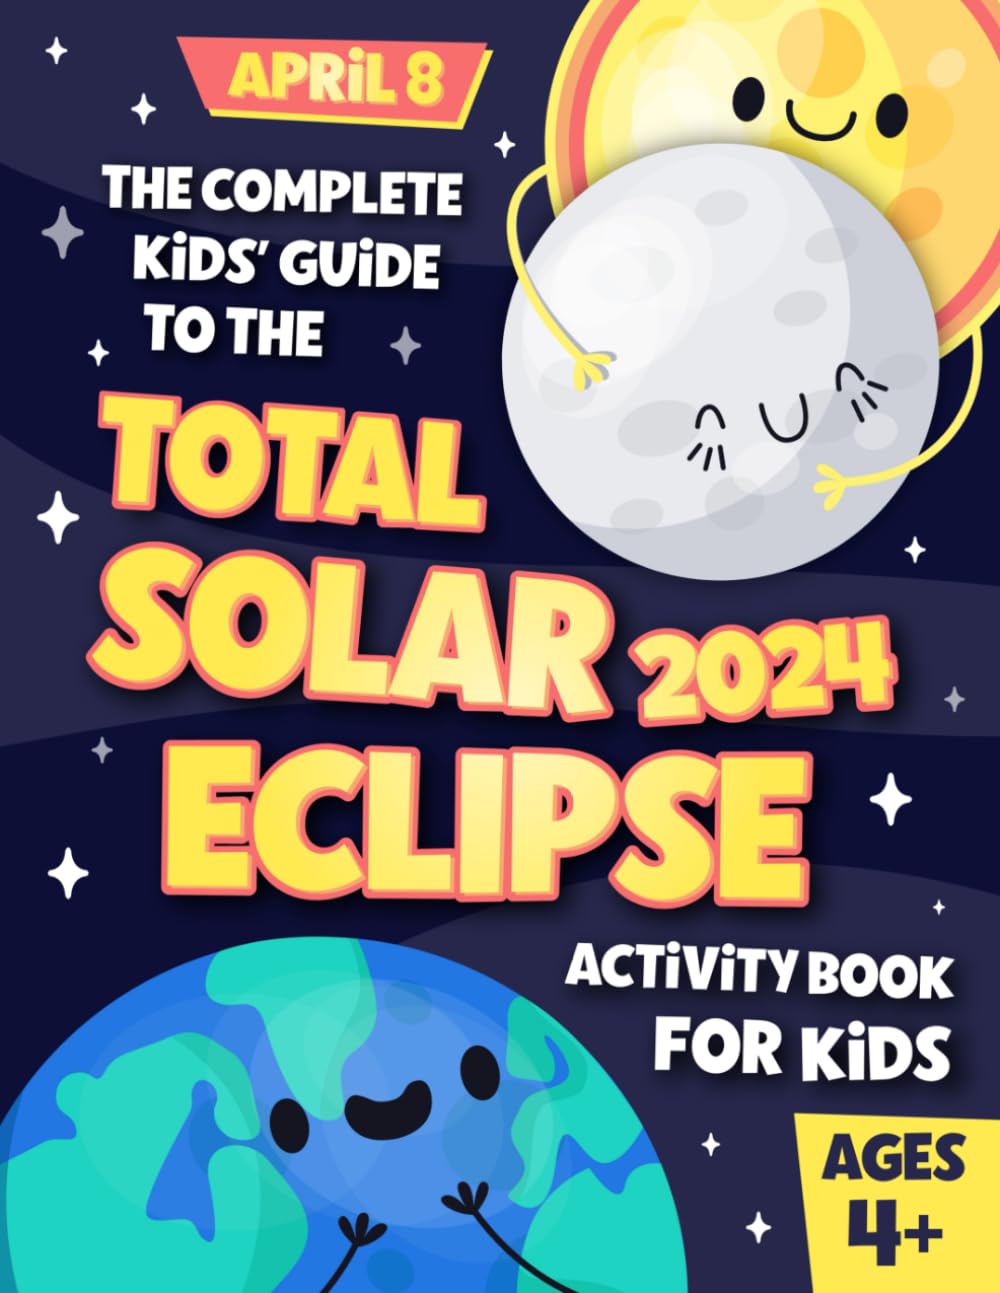 Solar Eclipse Activity Book for Kids: Educational Guide to the 2024 American Total Solar Eclipse | Including Totality Path, Activities, Trivia, Fun Facts, and More.